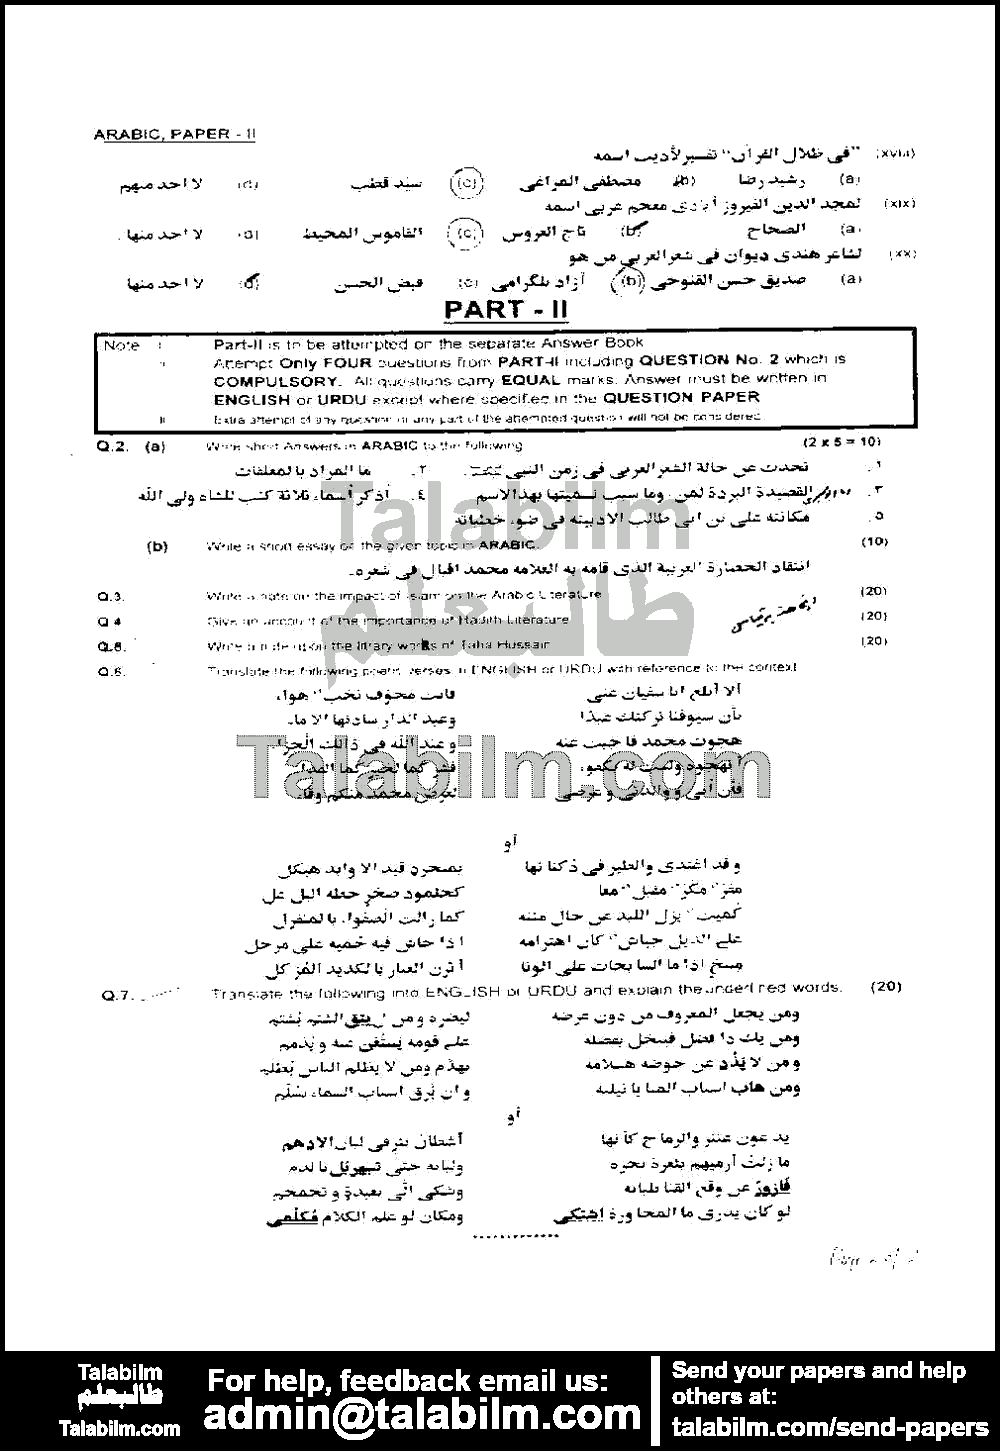 Arabic 0 past paper for 2011 Page No. 4